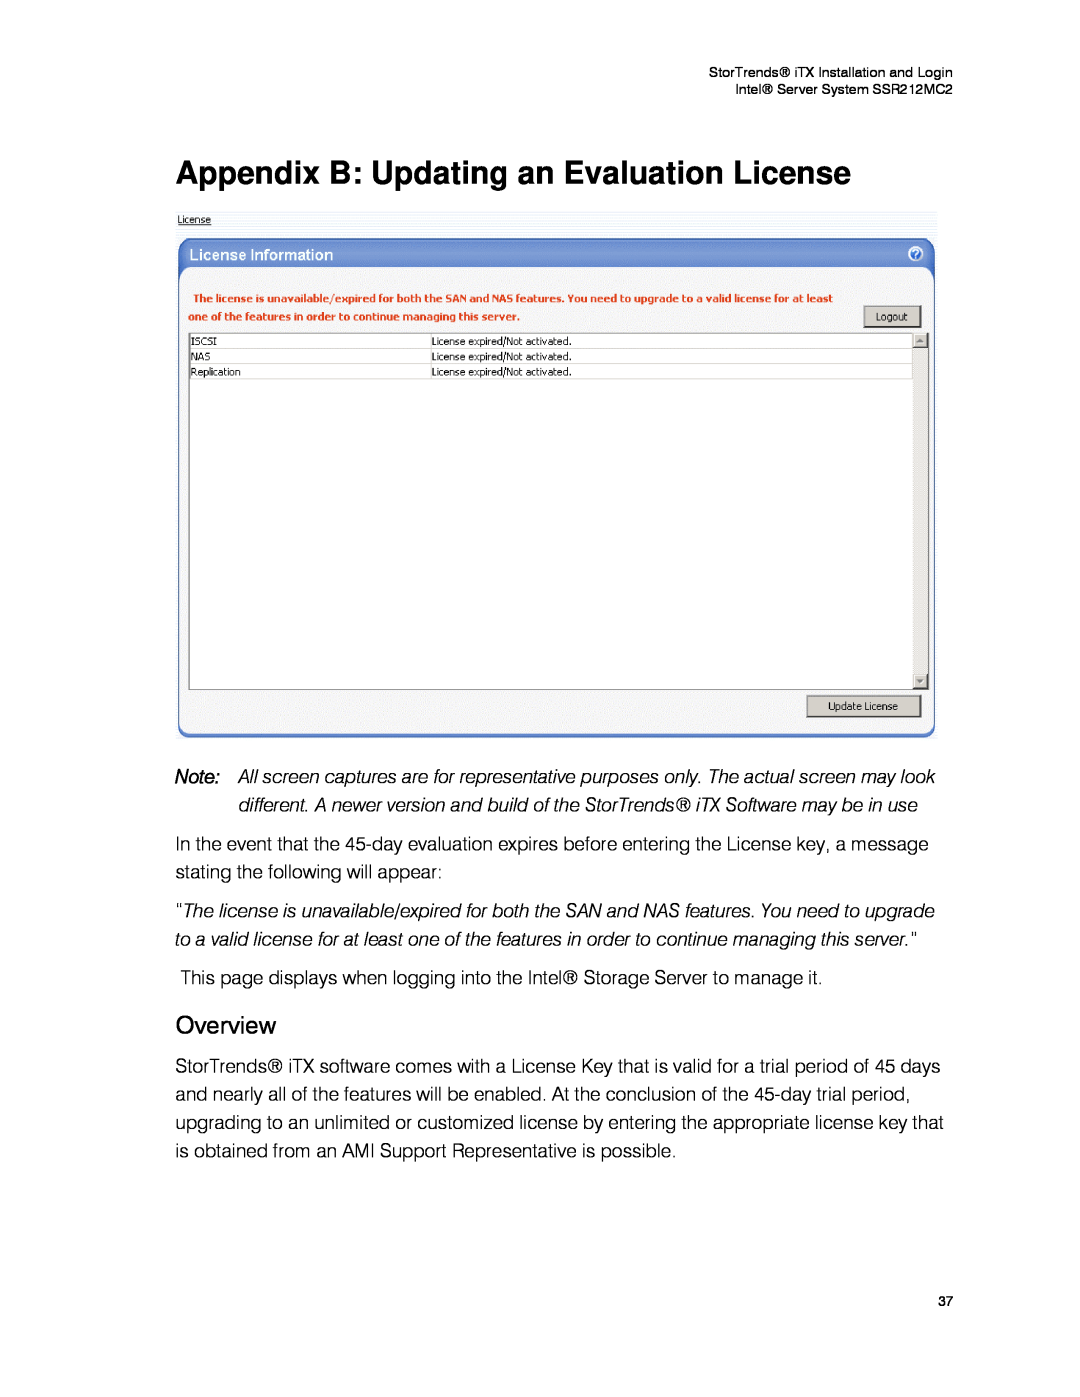 Intel SSR212MC2 manual Appendix B Updating an Evaluation License, Overview 